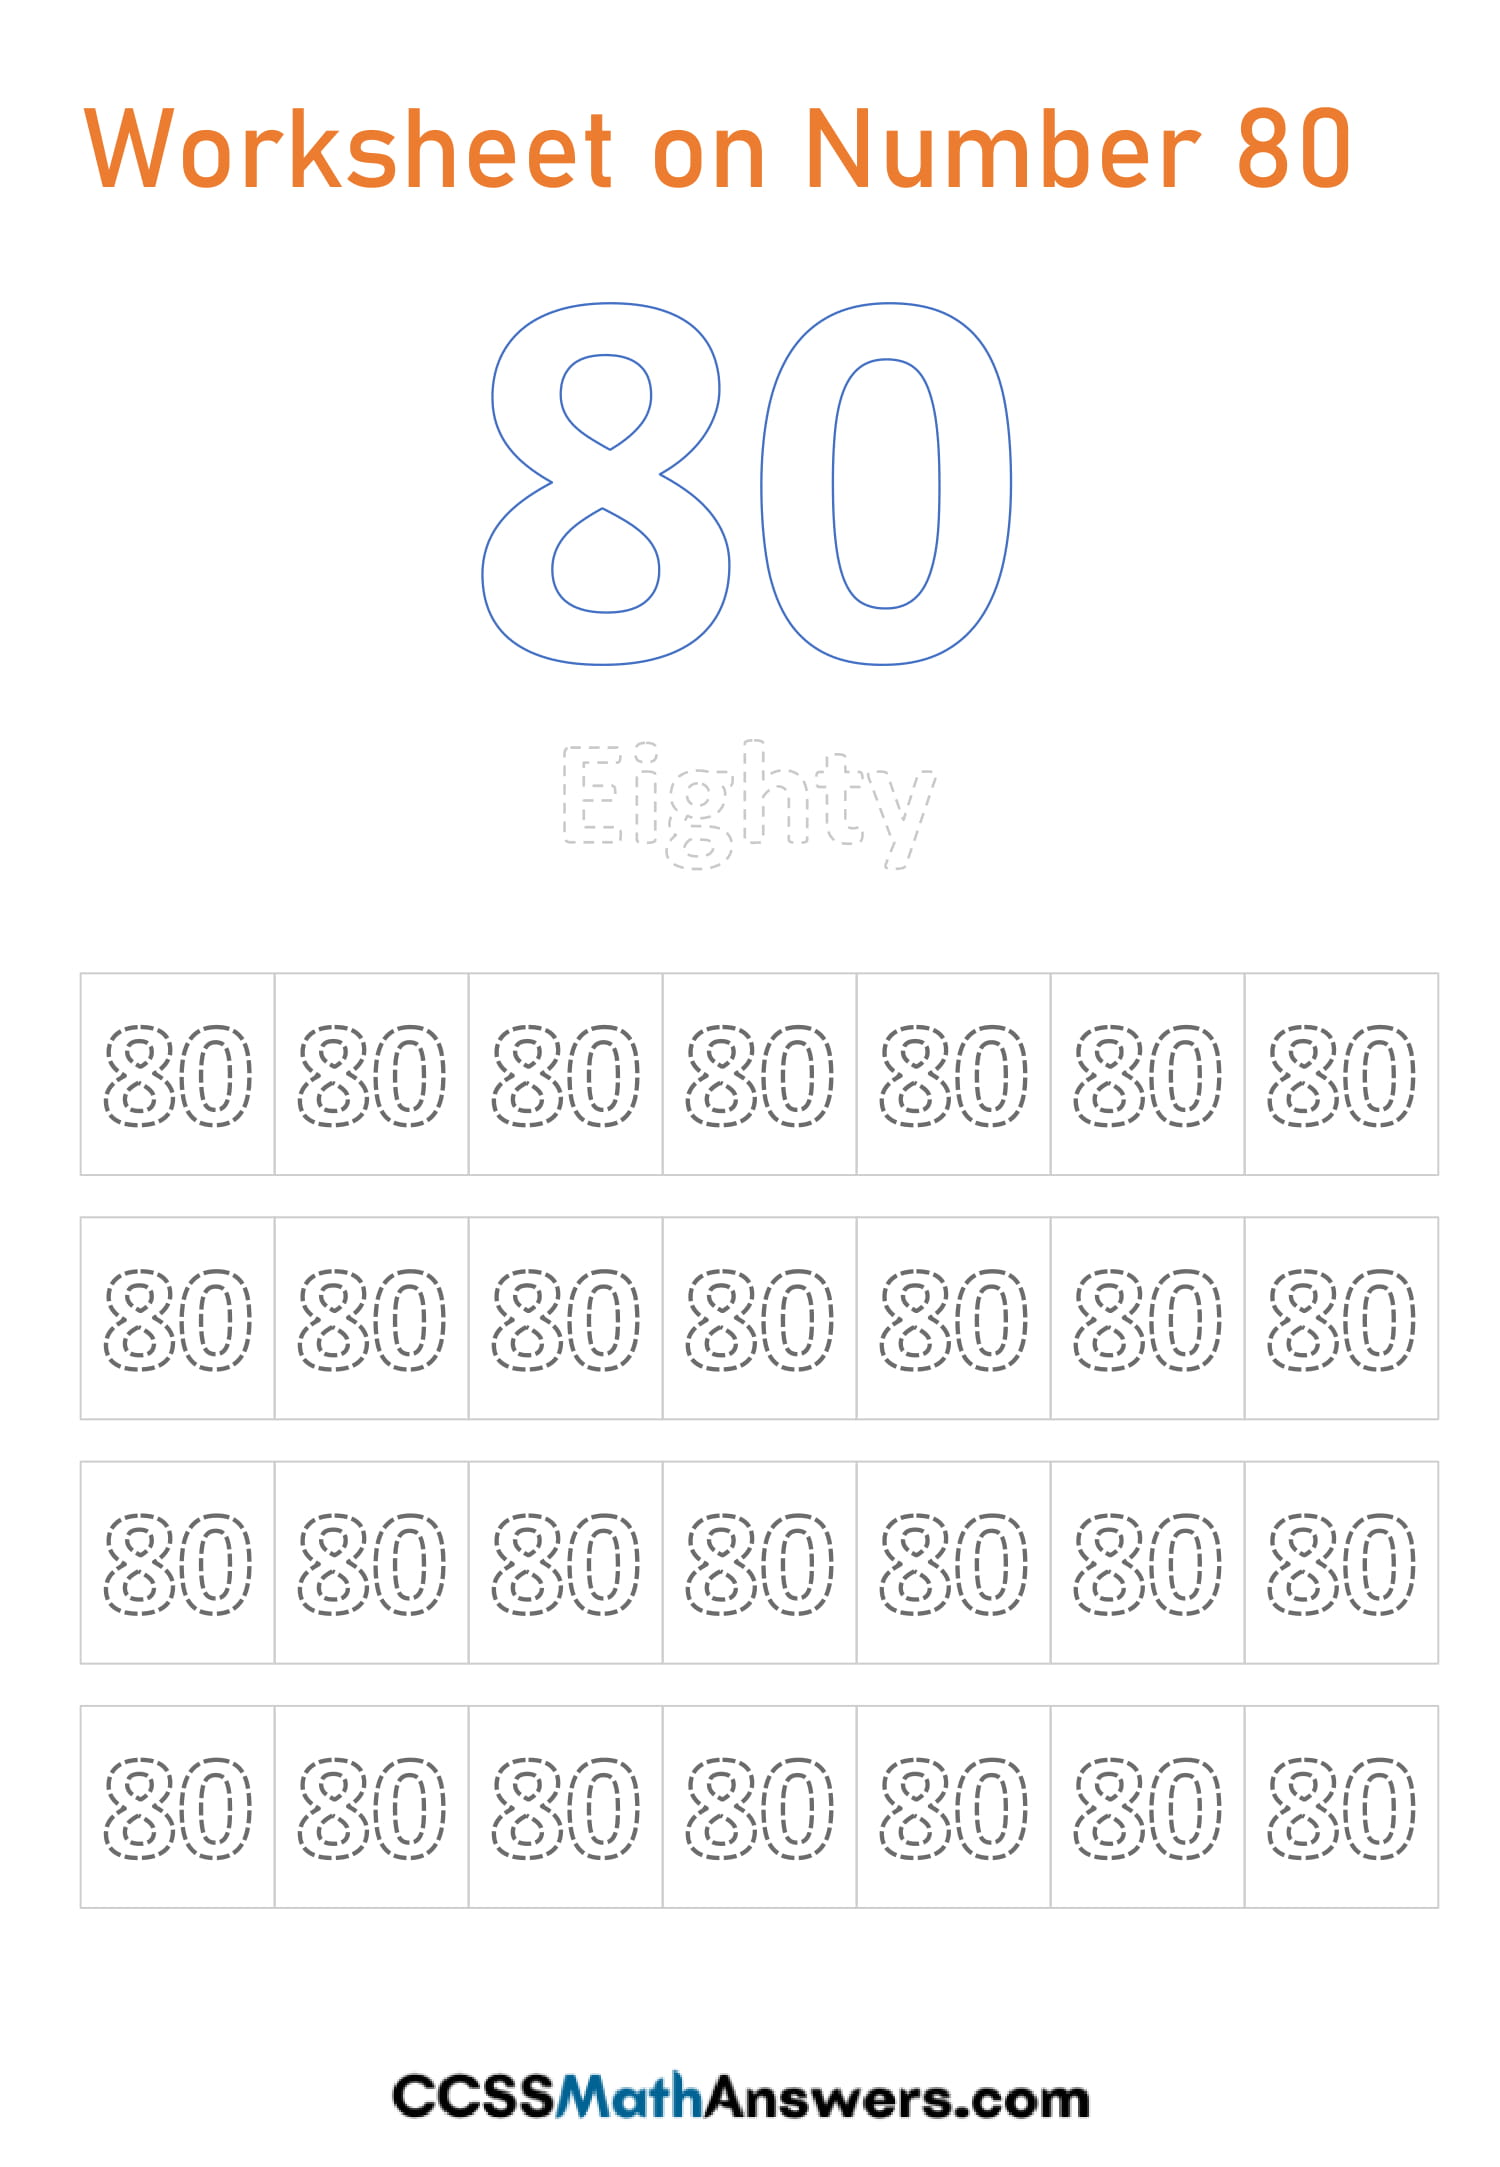 worksheet-on-number-80-free-printable-math-number-80-tracing-counting-activities-worksheets